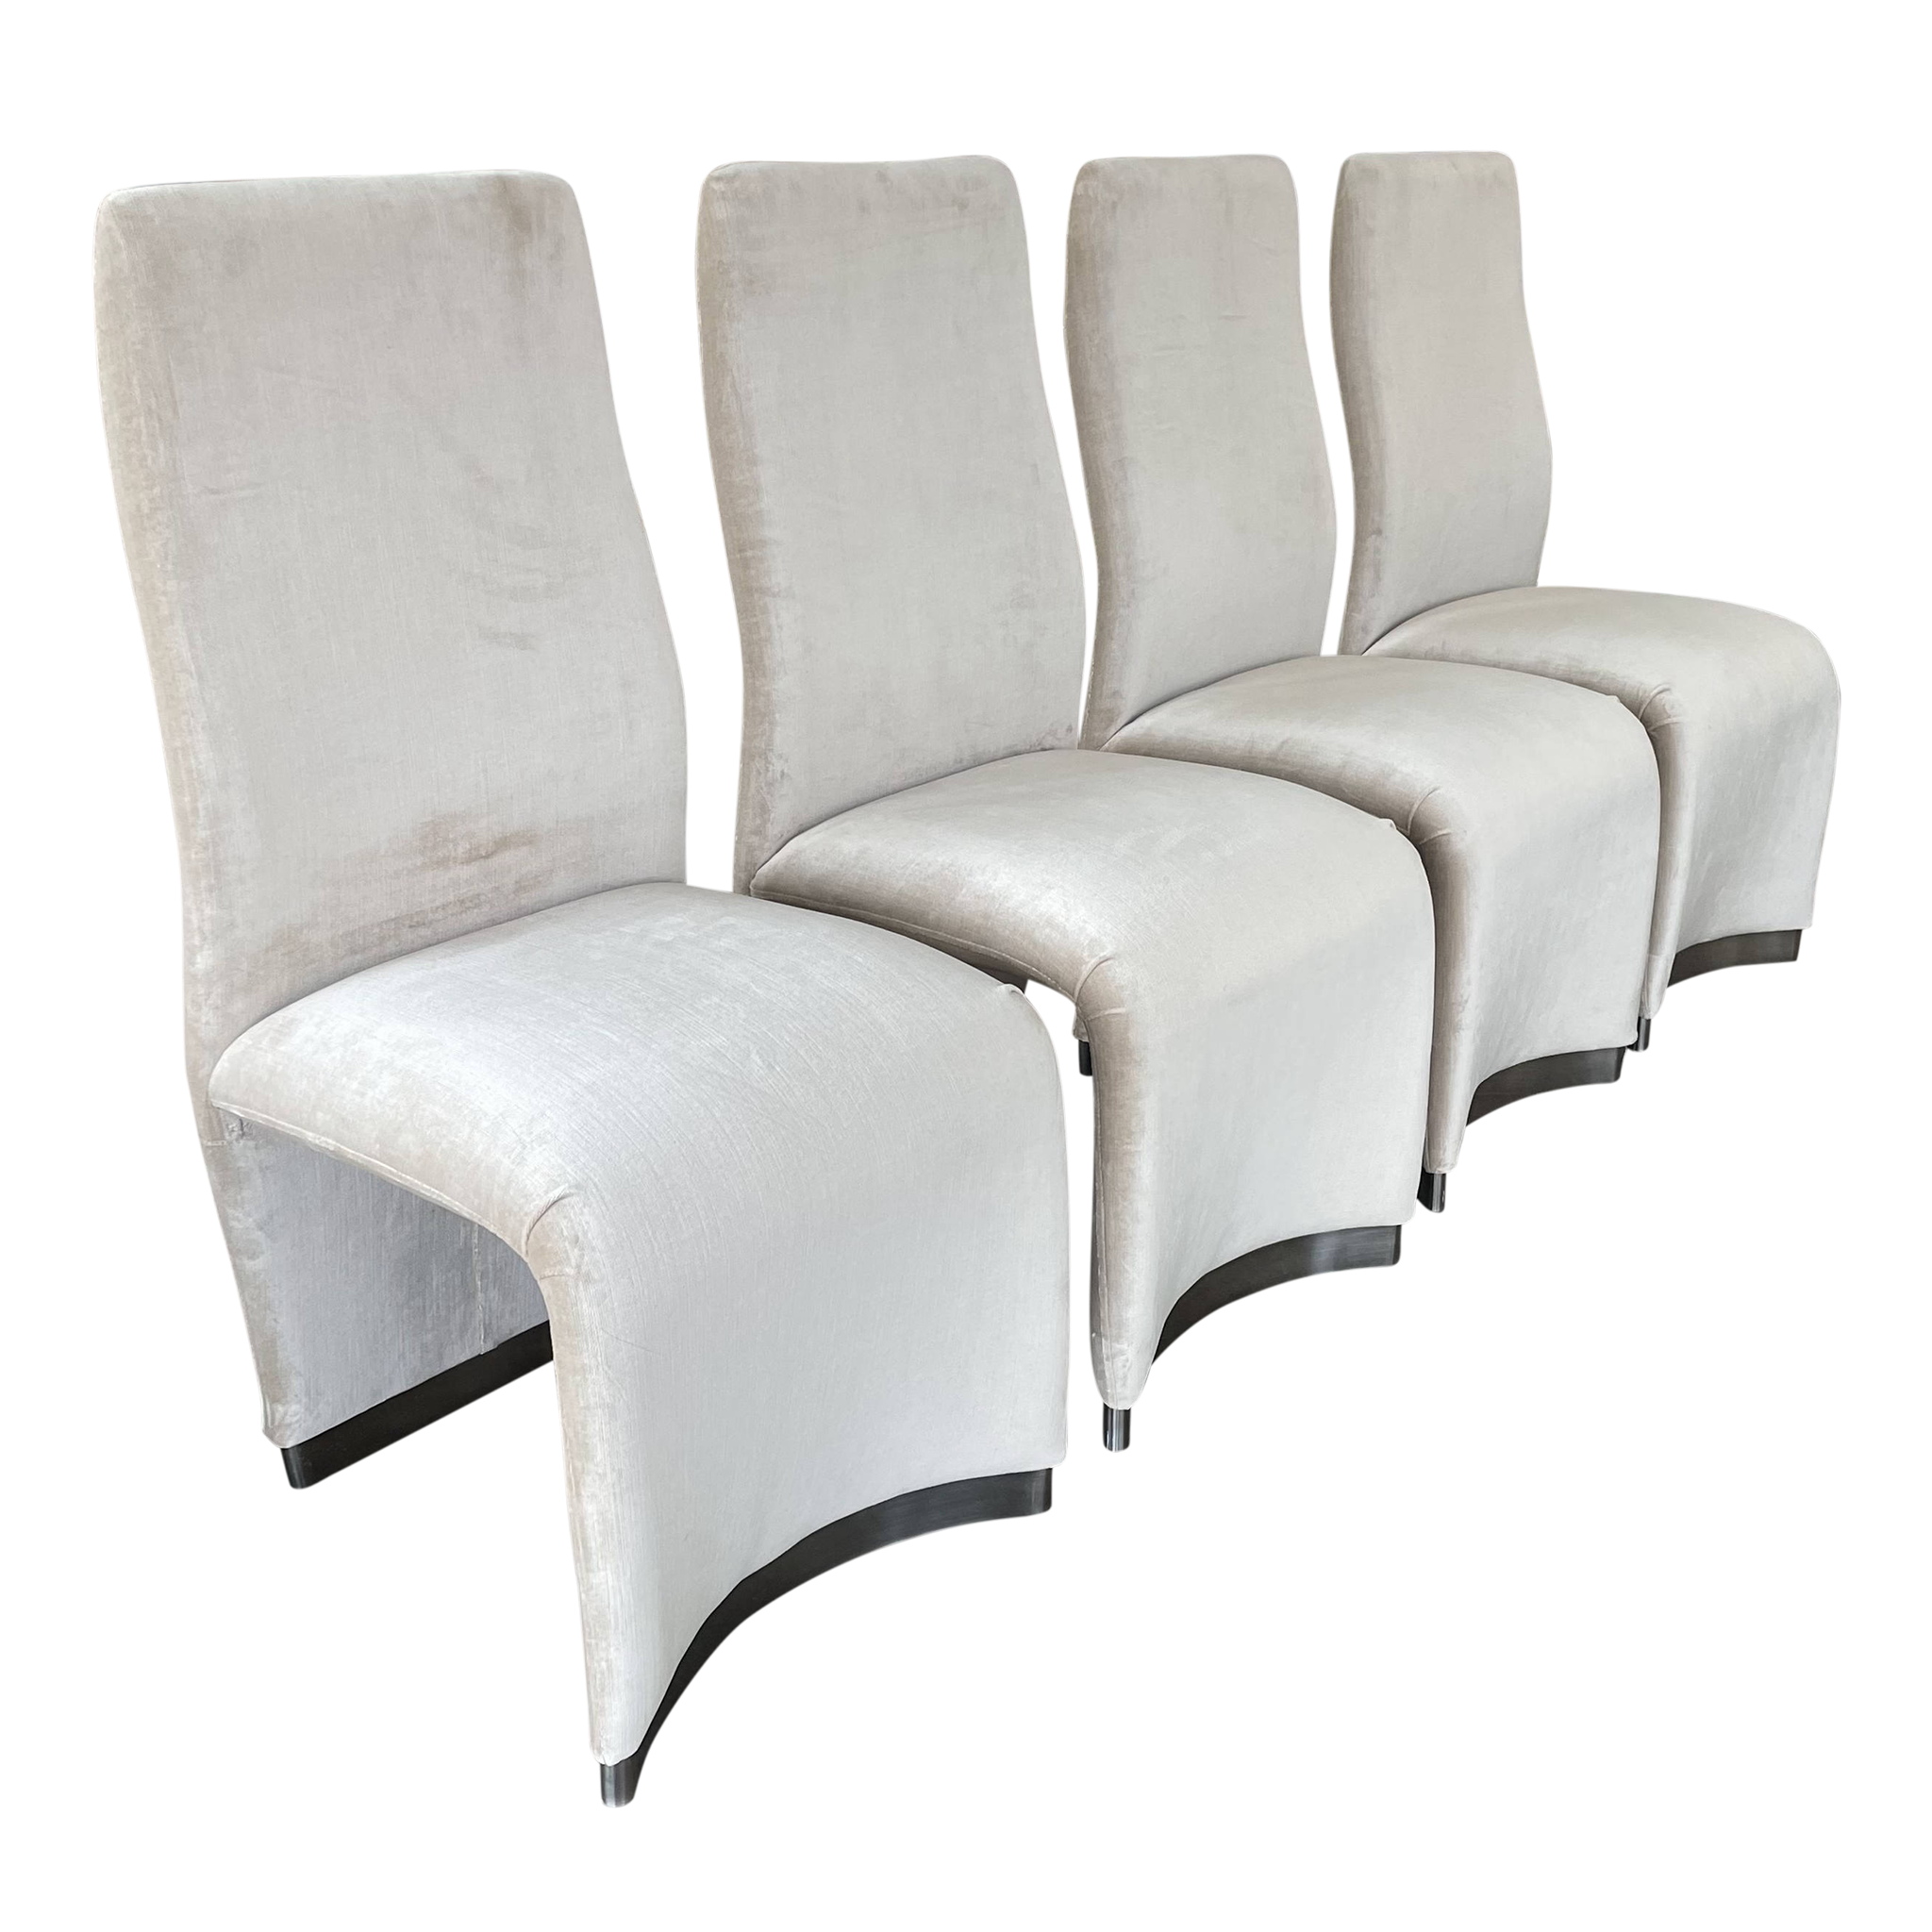 Set Of 4 Upholstered Dining Chairs By Dia Pop Up Home 